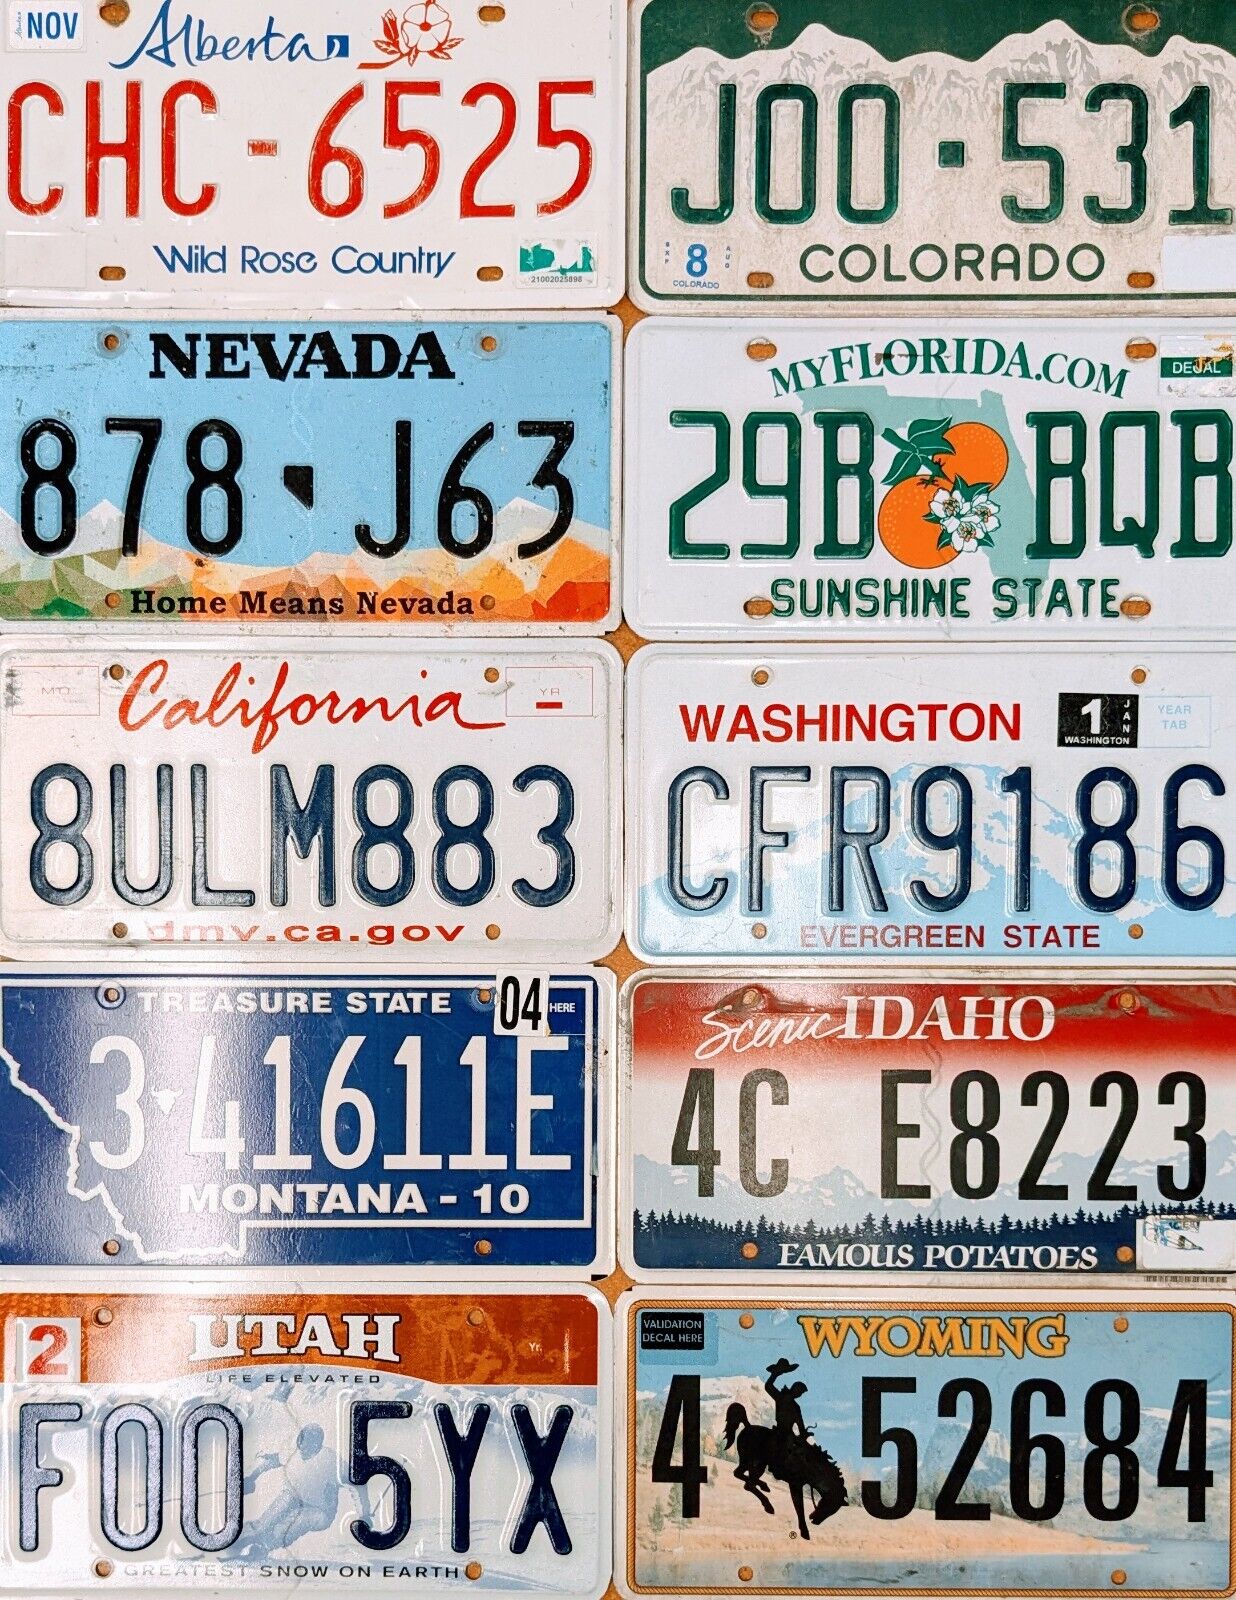 BULK LOT of 10 mixed states License Plates NICE QUALITY